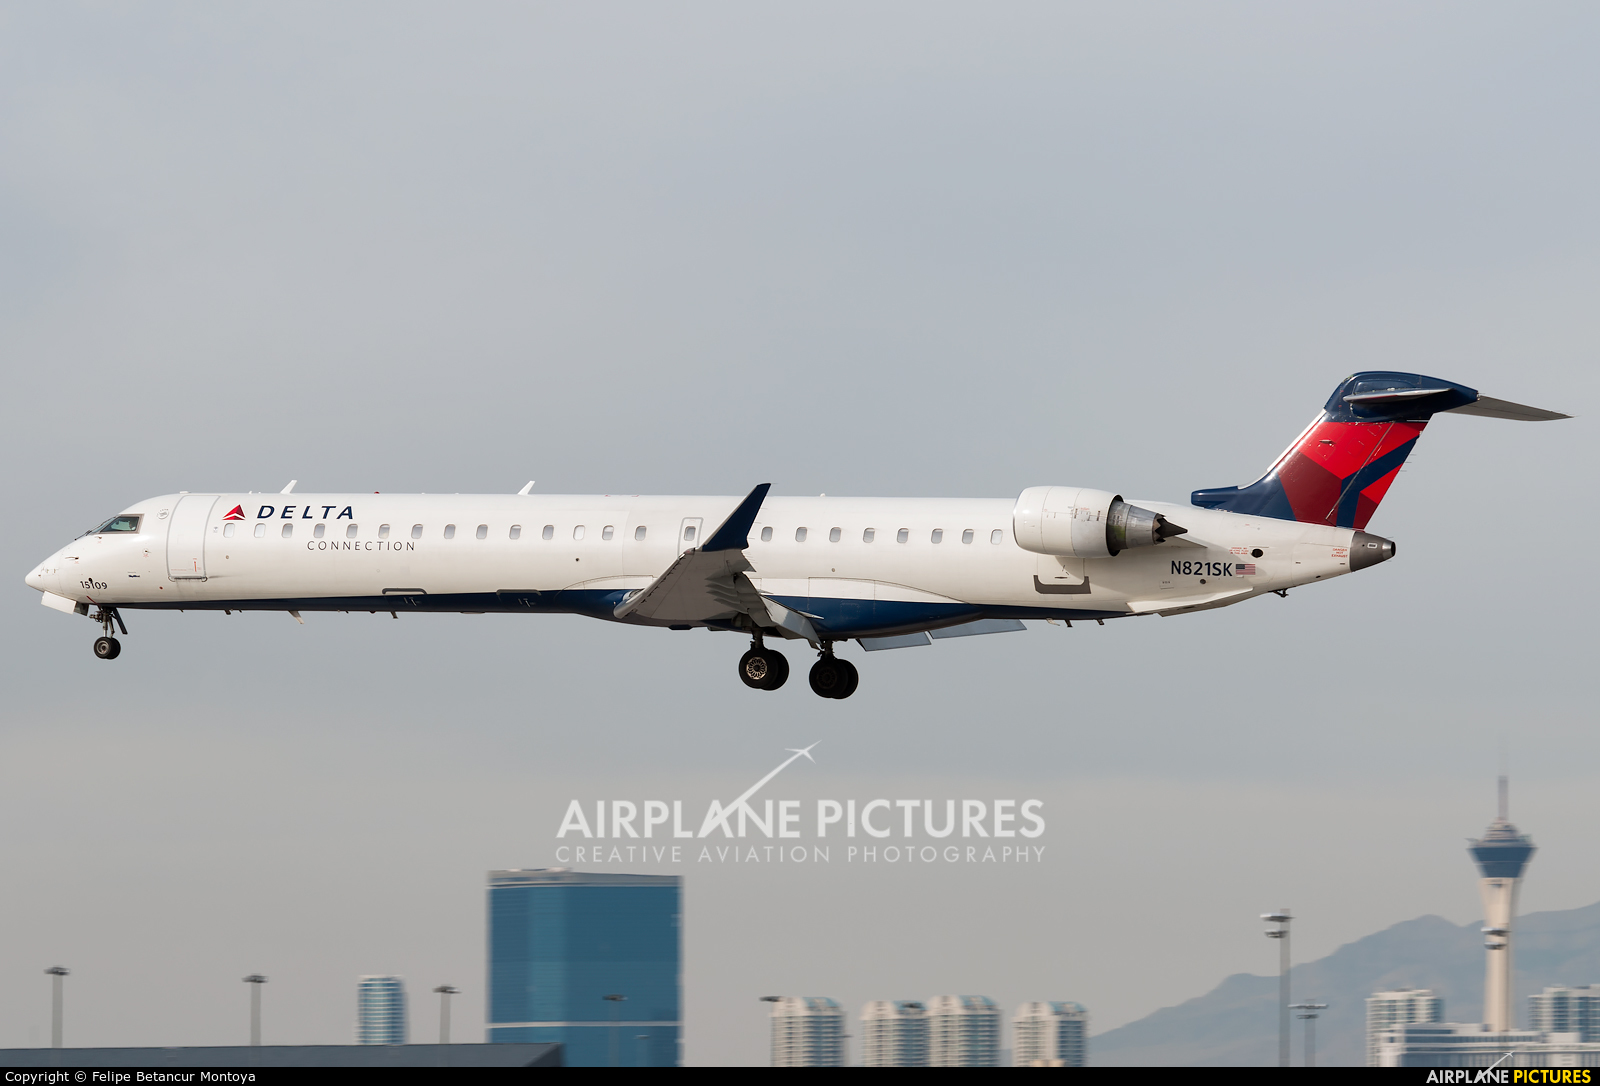 Delta Connection - SkyWest Airlines N821SK aircraft at Las Vegas - McCarran Intl